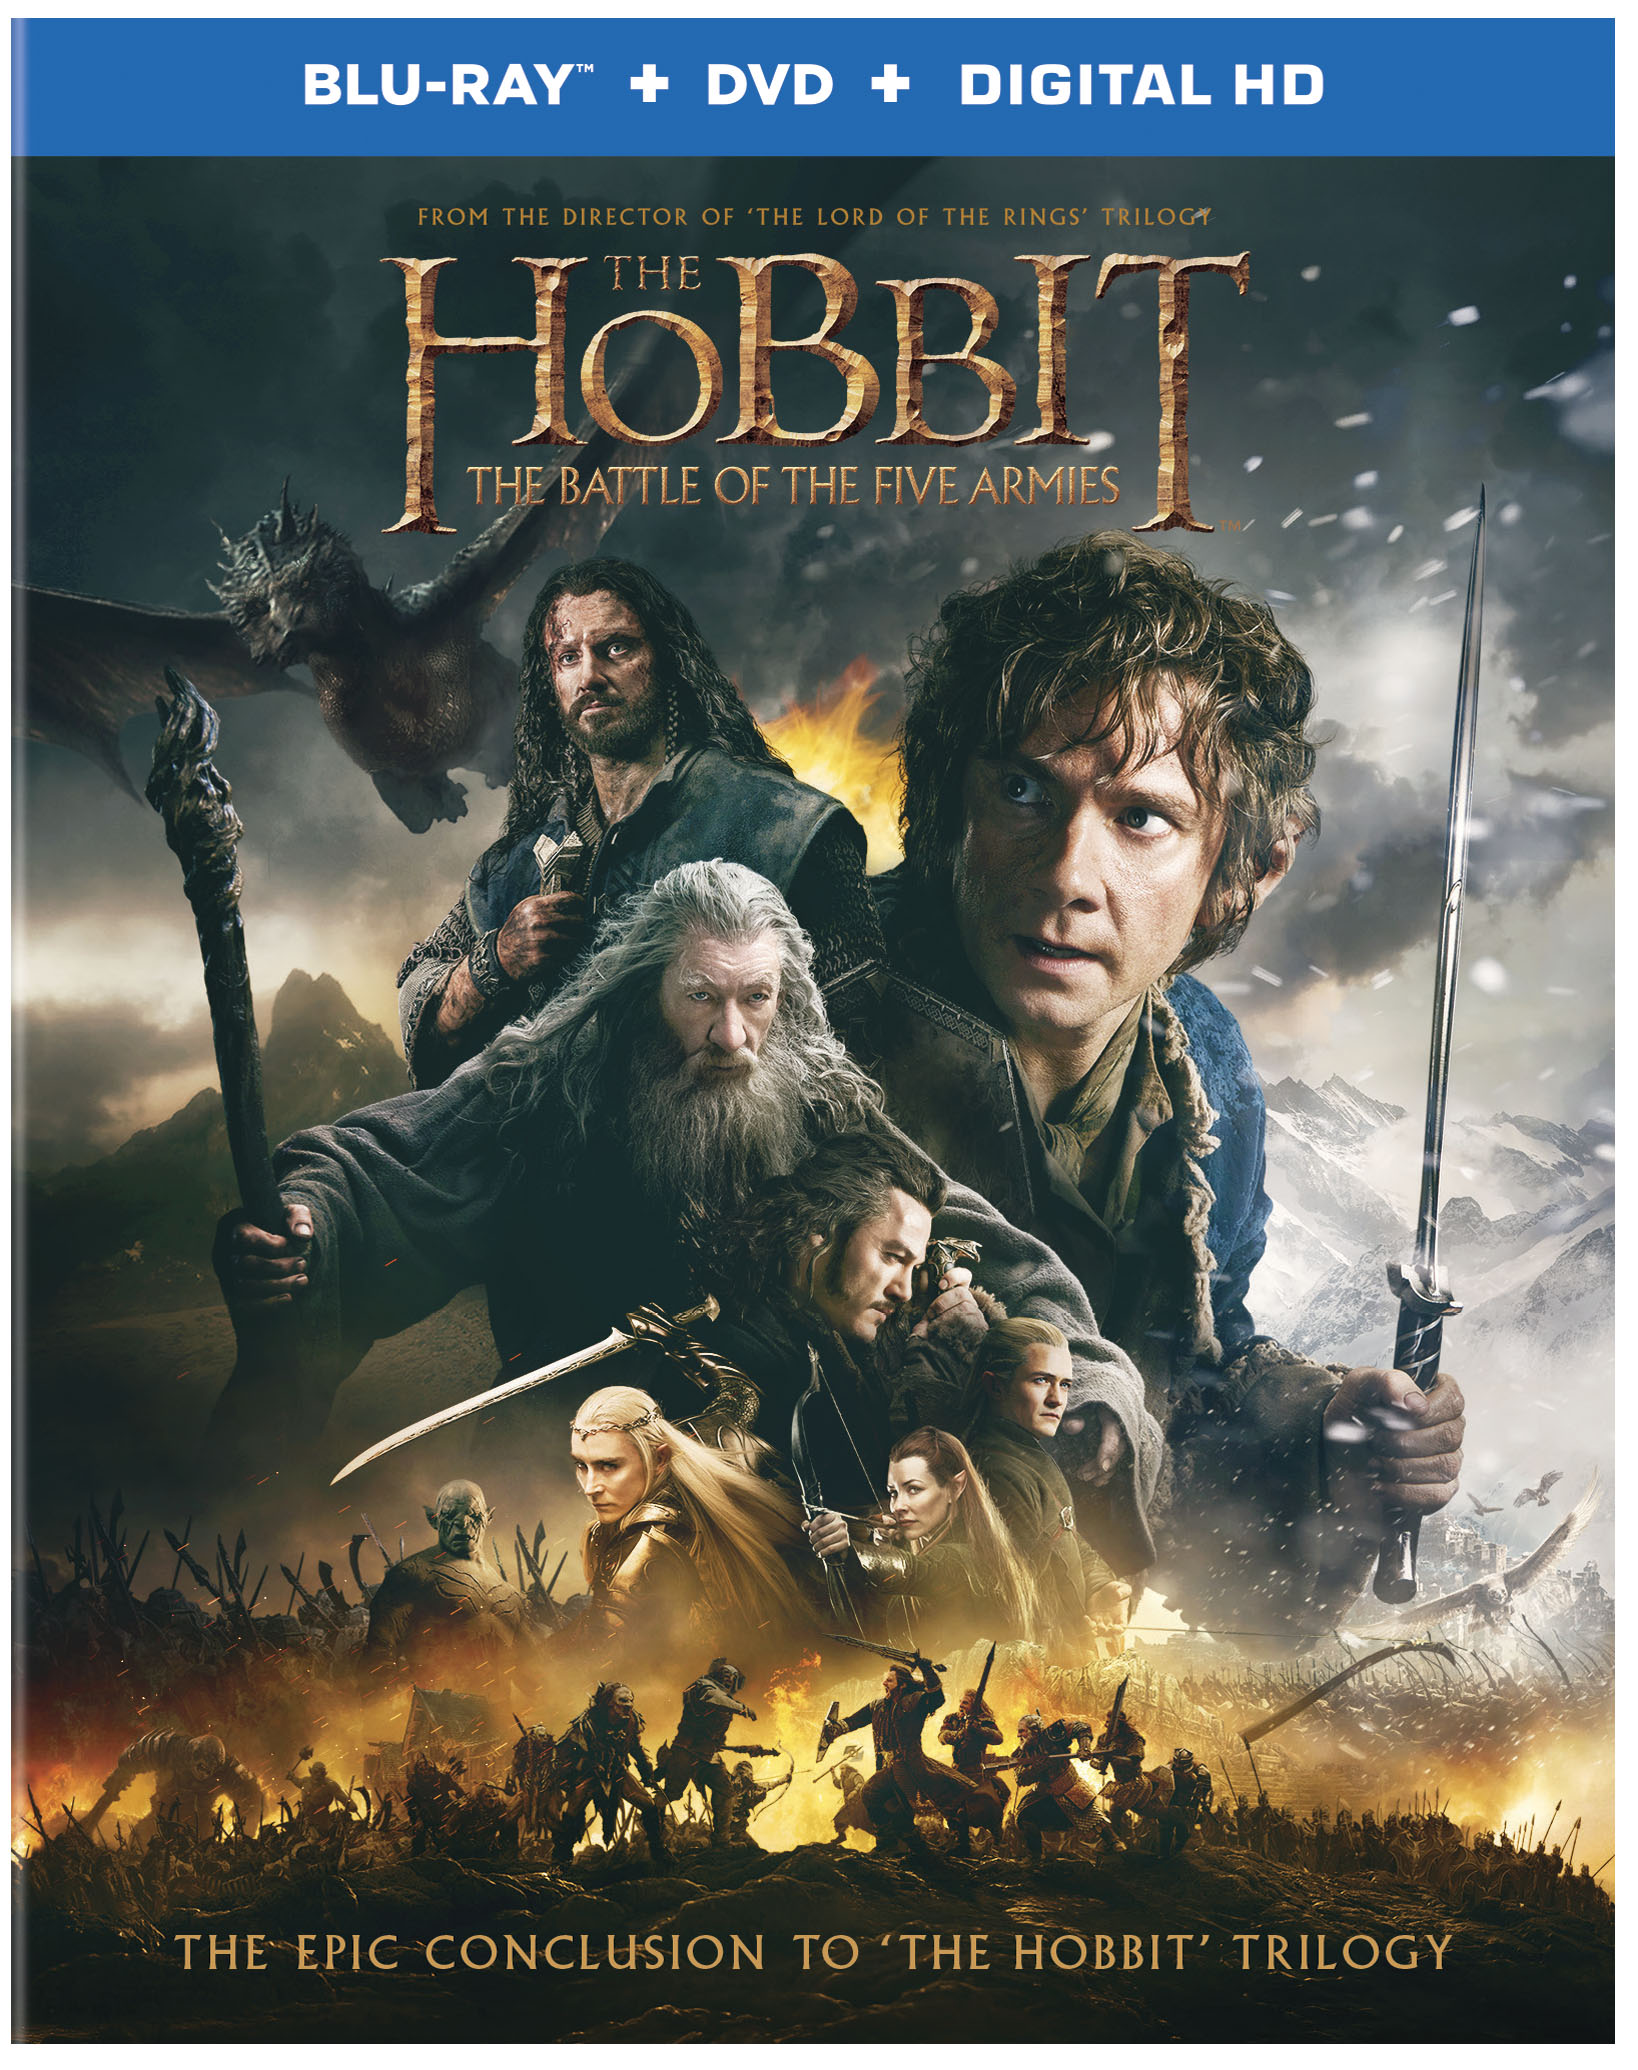 The Hobbit The Battle of The Five Armies Blu-ray Review